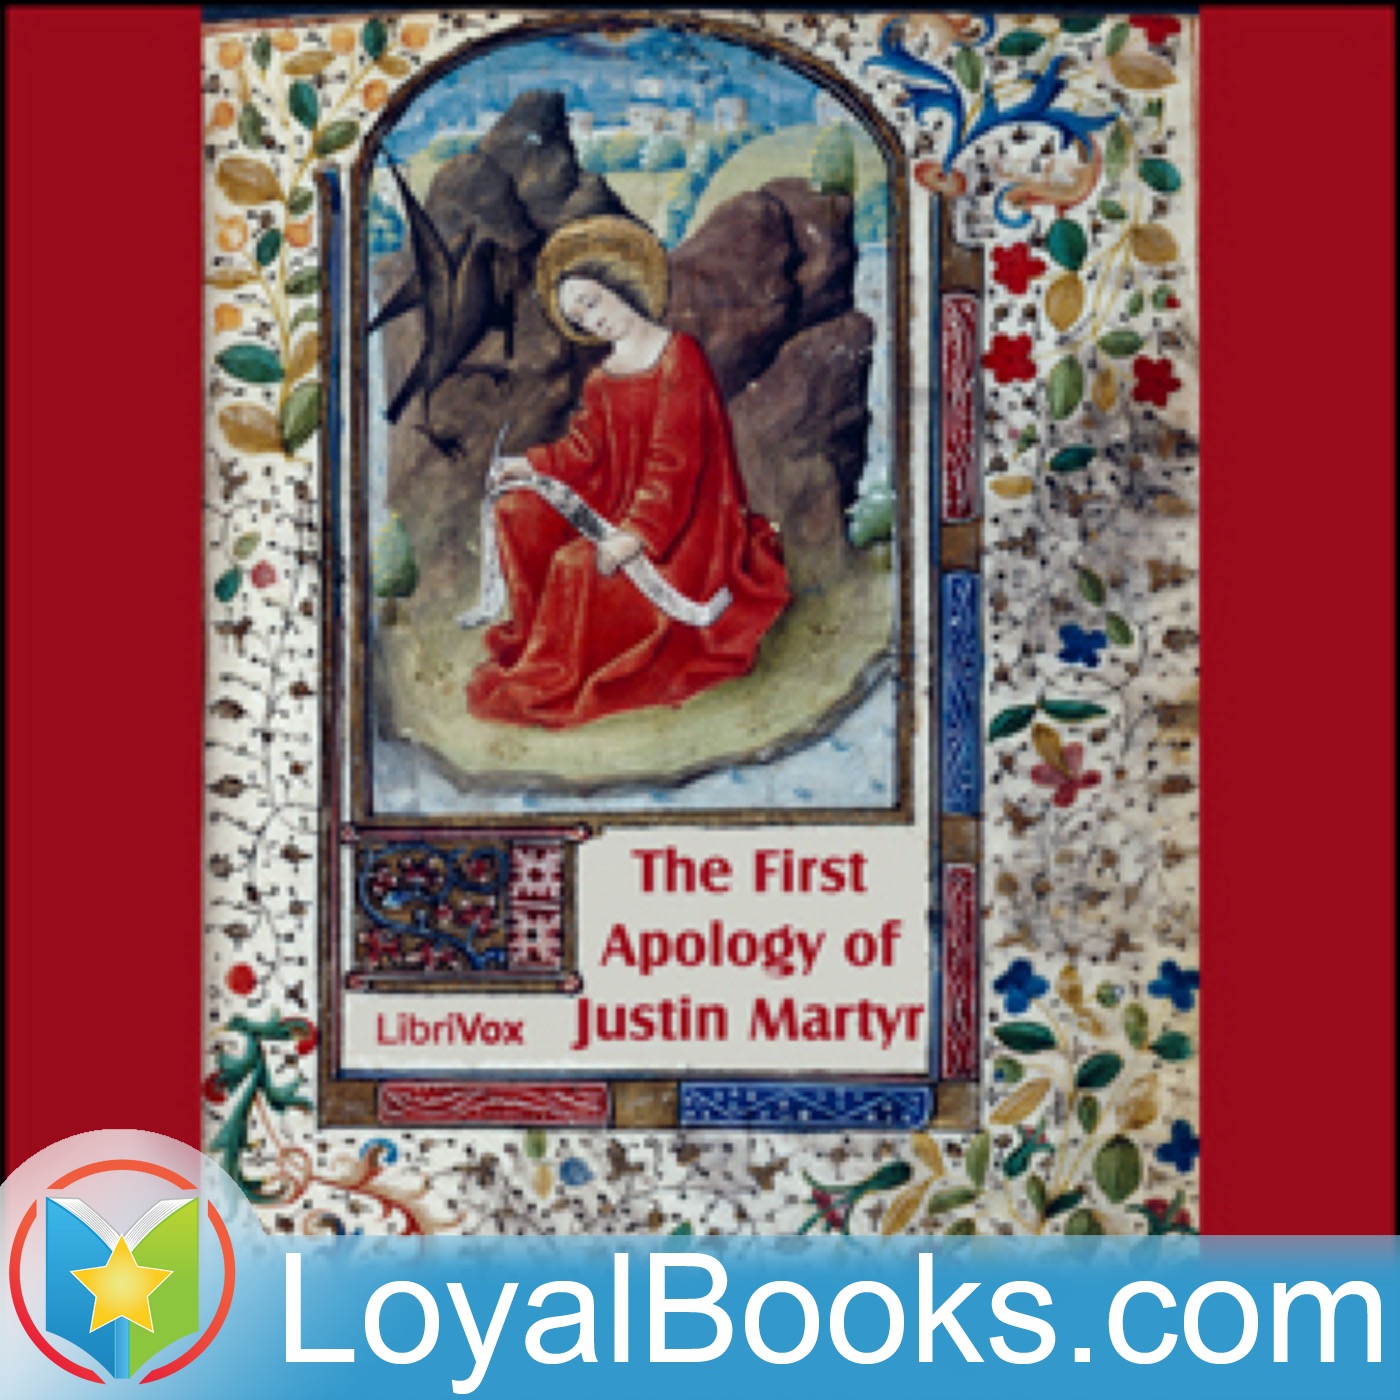 The First Apology of Justin Martyr by Saint Justin Martyr